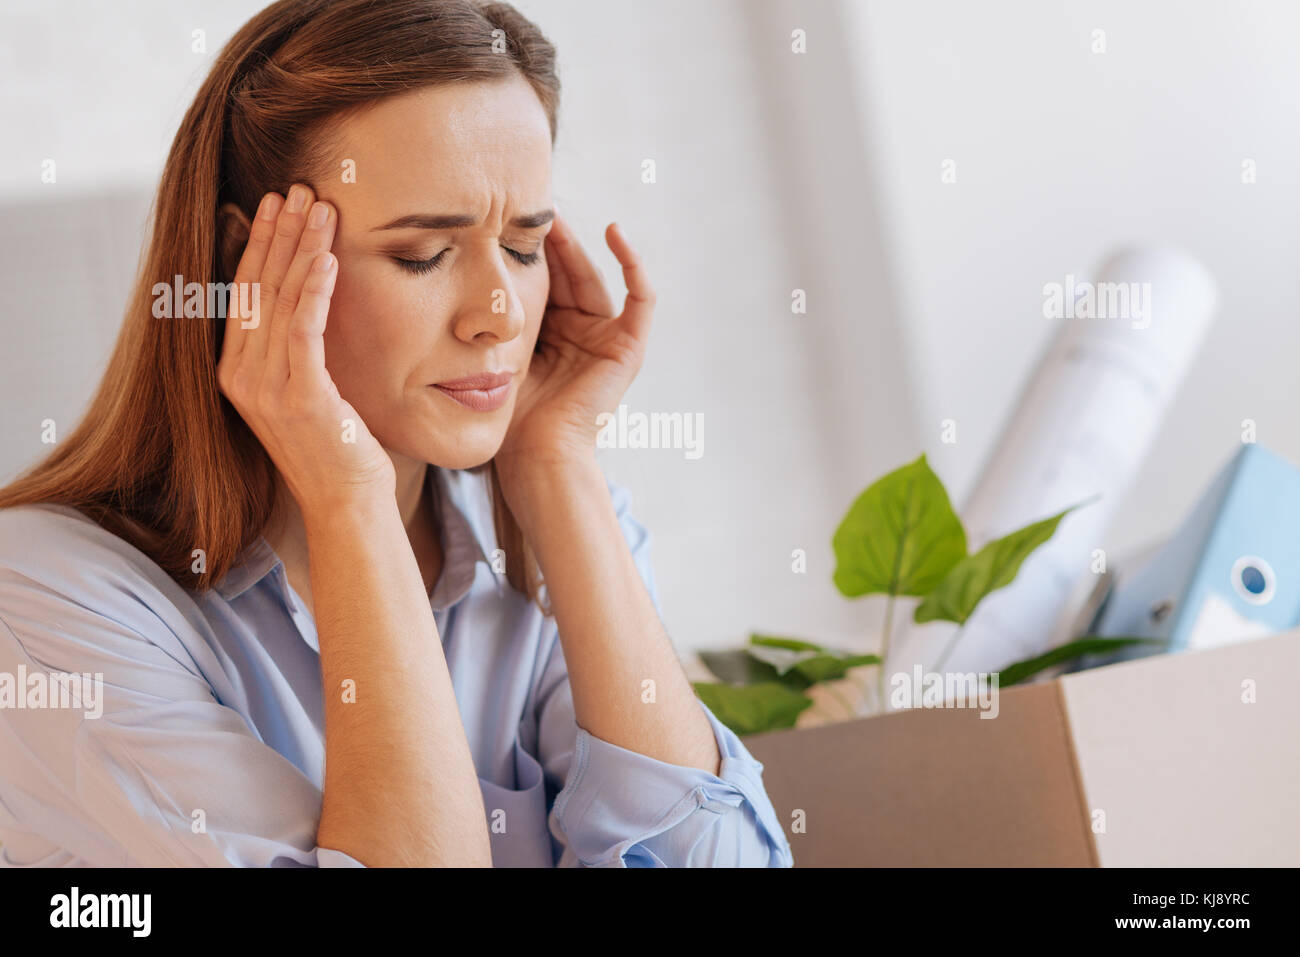 Nervous emotional woman having a headache after being dismissed Stock Photo